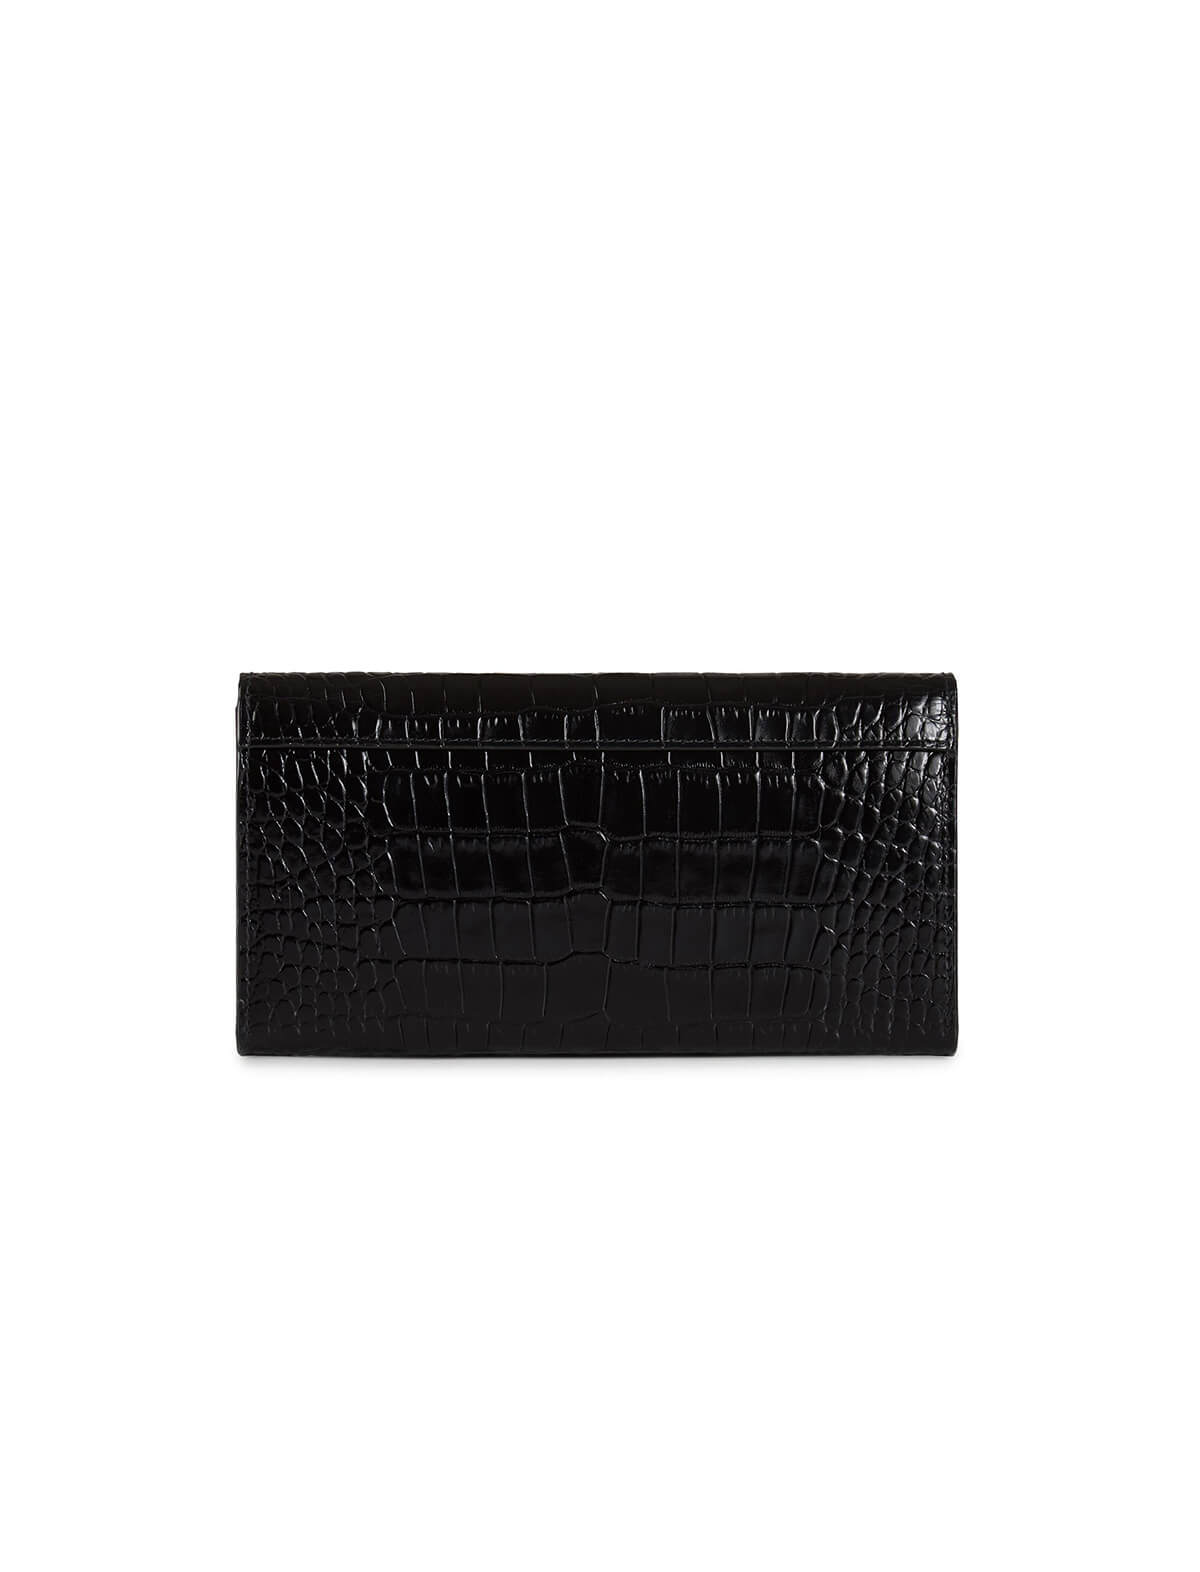 STRATHBERRY Multrees Wallet on Chain in Embossed Croc Black